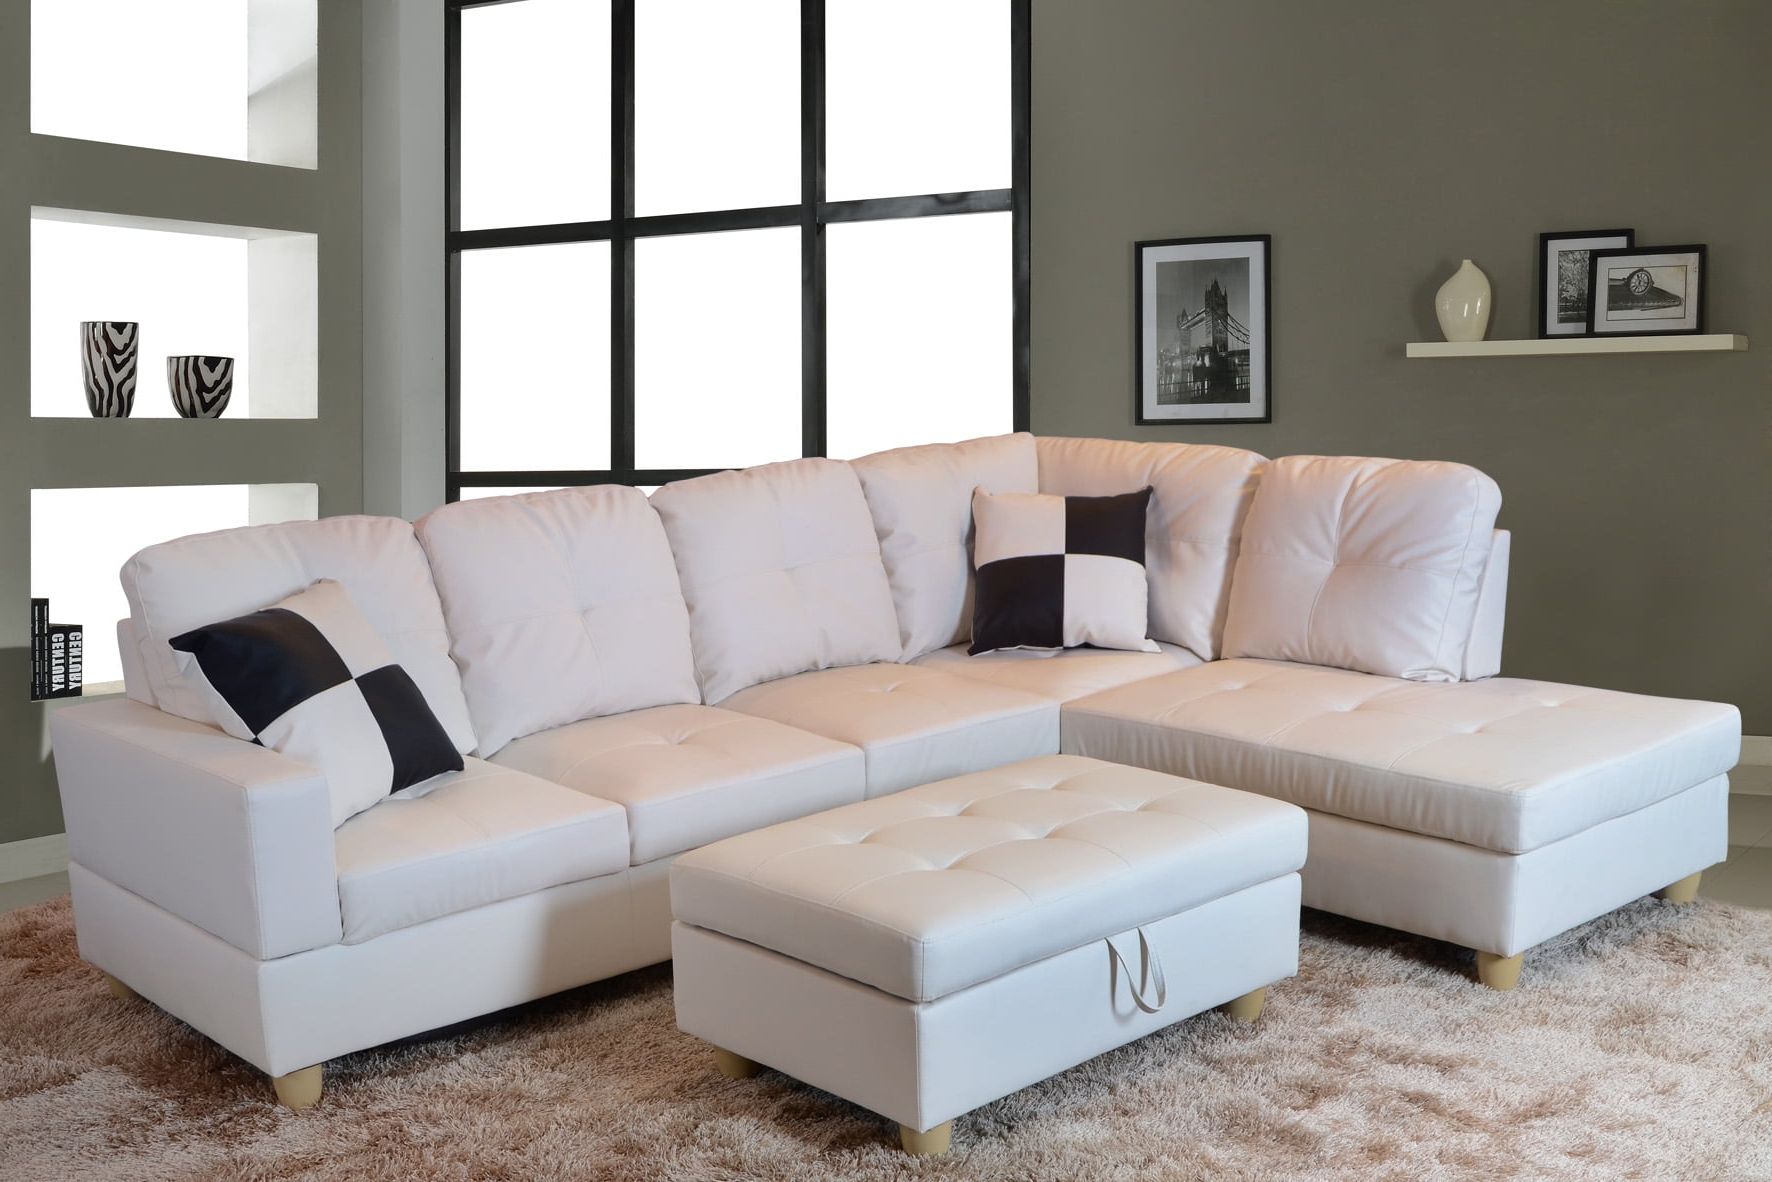 Most Current Ponliving Furniture L Shape Traditional Sectional Sofa Set With Ottoman Inside Faux Leather Sectional Sofa Sets (View 11 of 15)